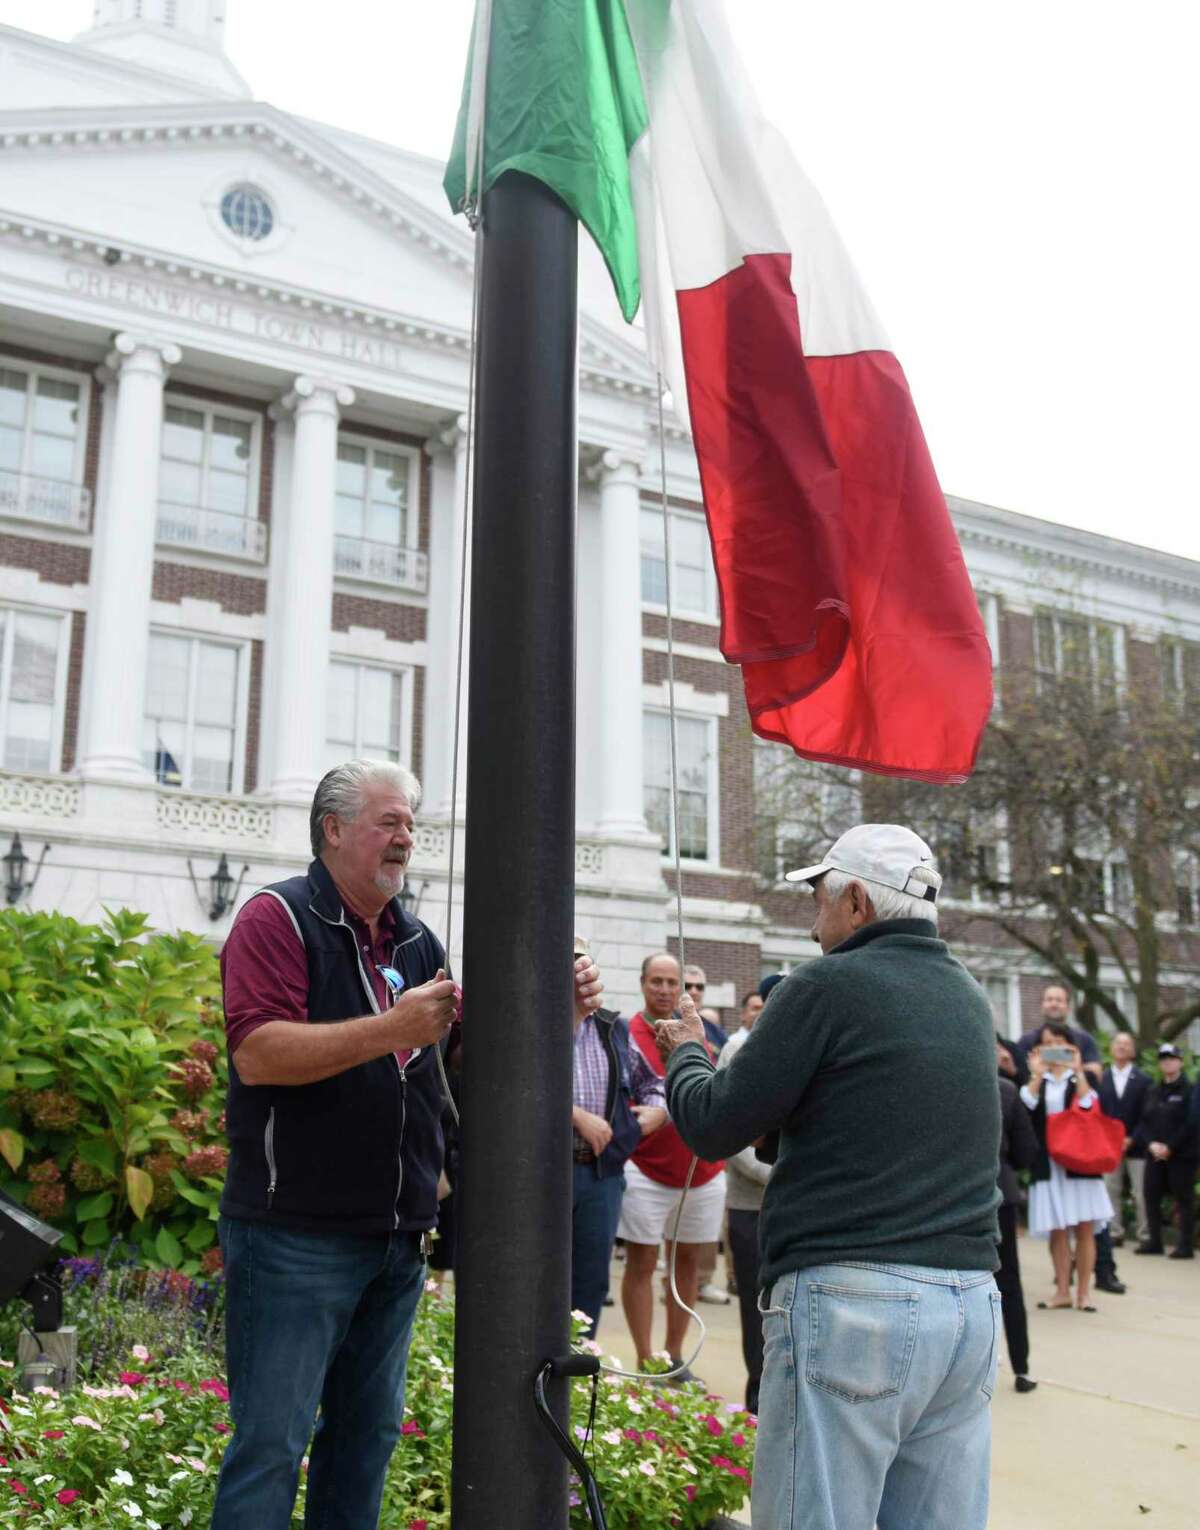 Tony DeVita Jr., left, and his father, Tony DeVita, raise the Italian flag during the 34th annual Columbus Day Celebration at Town Hall in Greenwich, Conn. Monday, Oct. 11, 2021. Presented by the St. Lawrence Society, the ceremony was dedicated to all members past and present for maintaining Italian traditions and heritage as the Italian flag was raised over Town Hall.